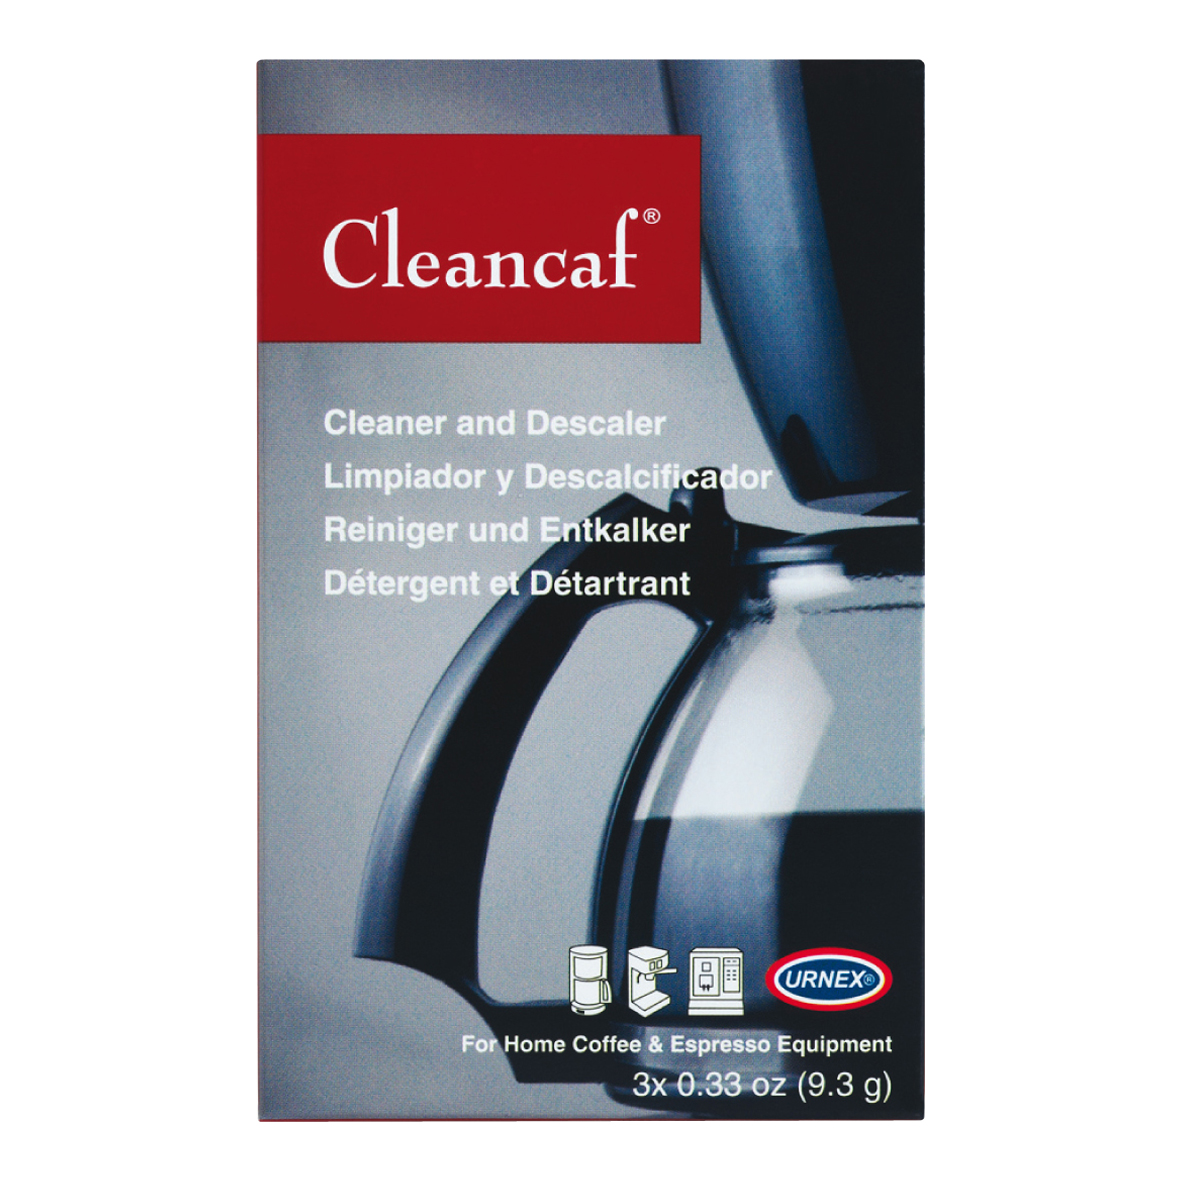 Cleancaf Cleaner and Descaler